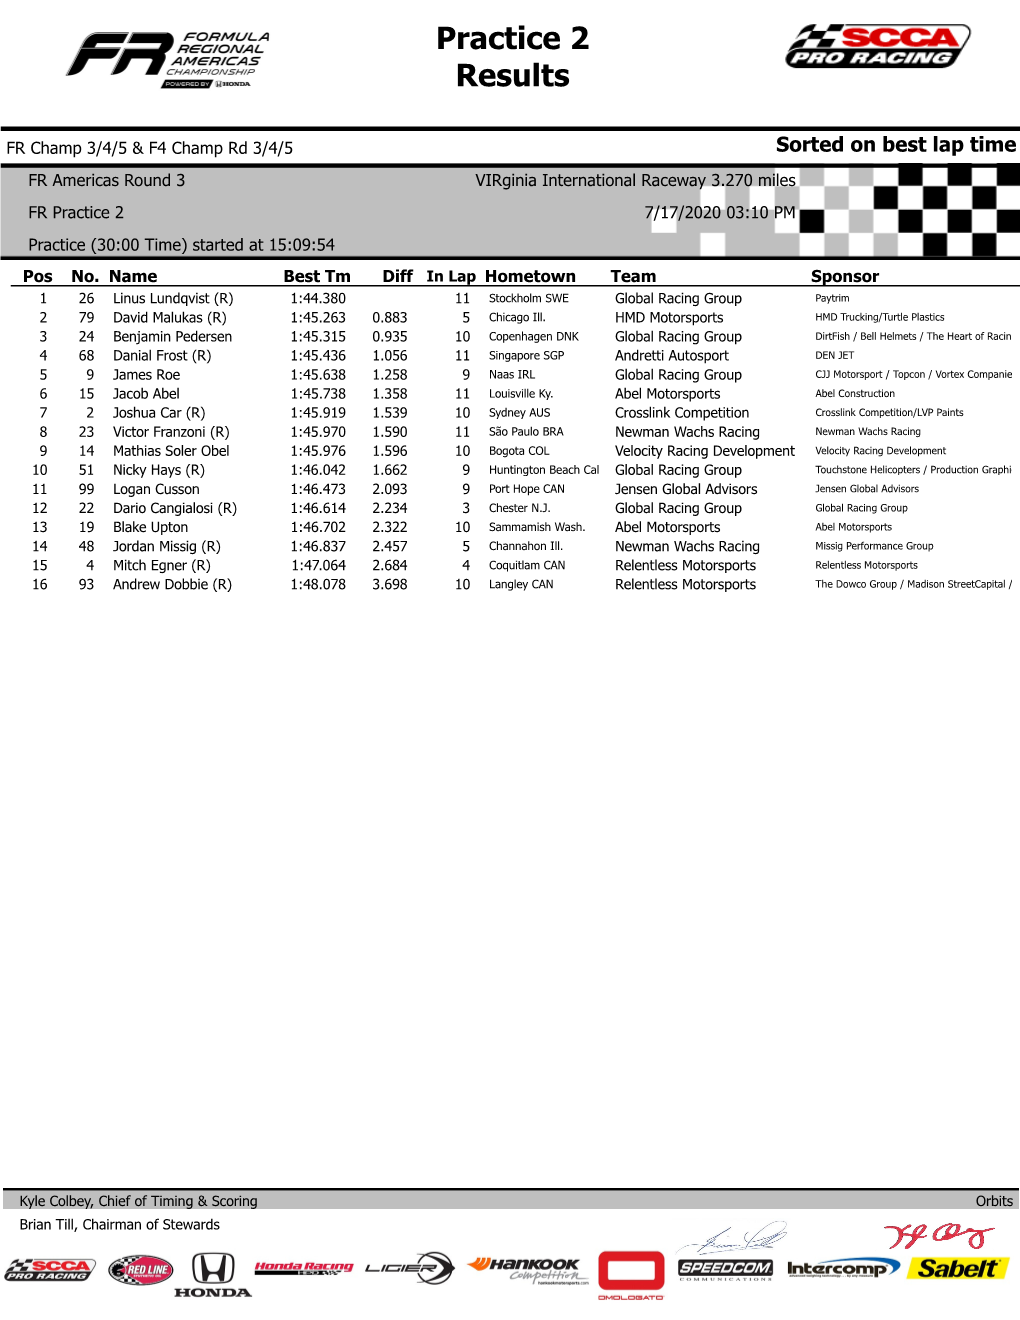 Practice 2 Results